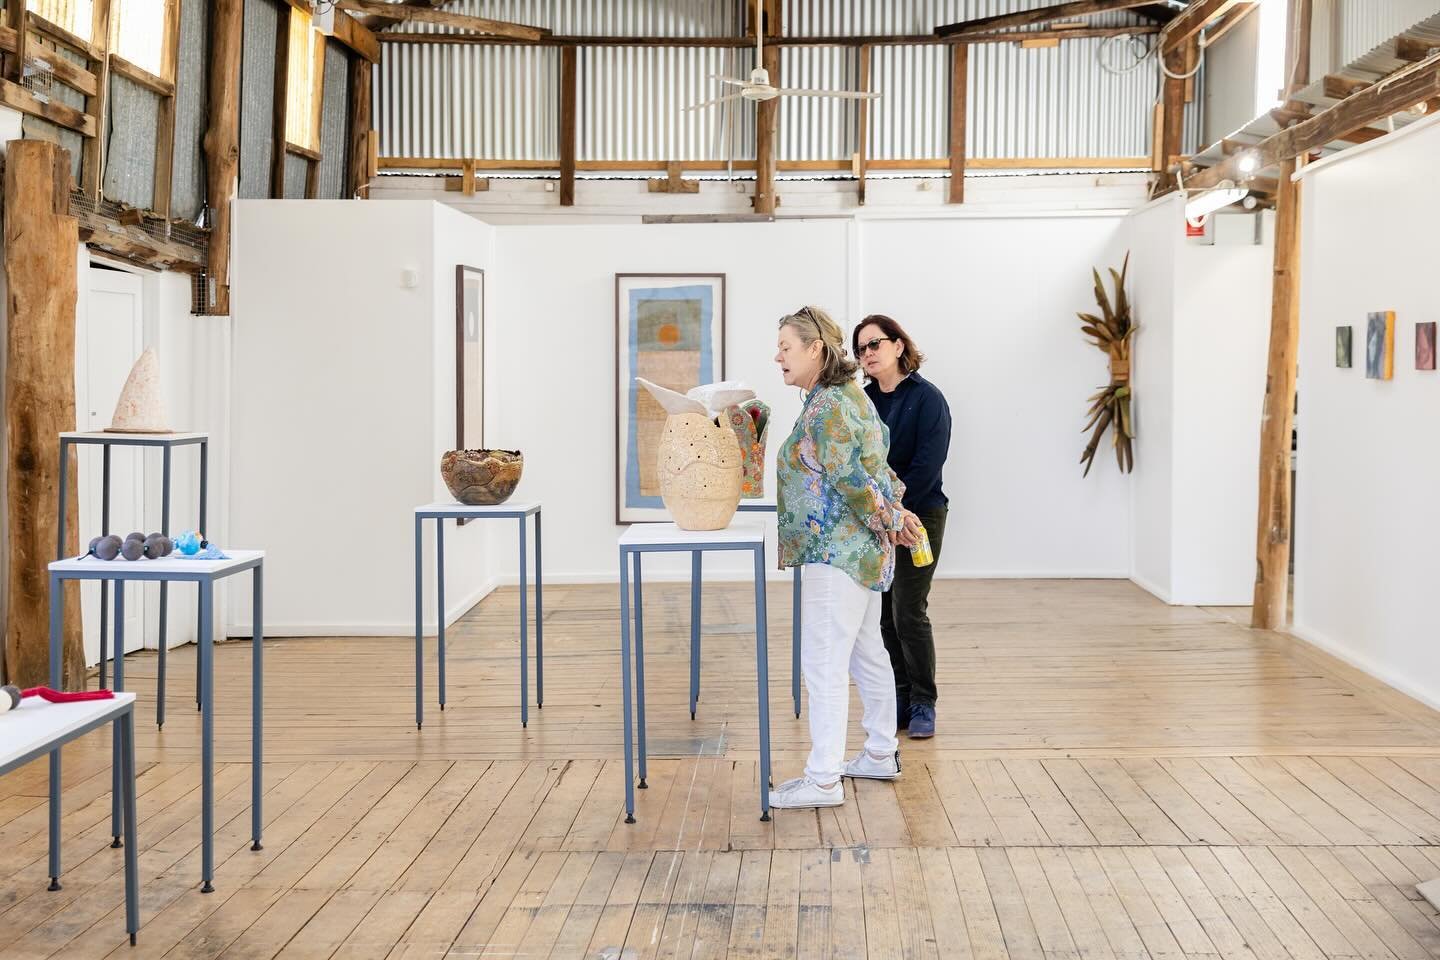 Applications are still open for Strathnairn Arts&rsquo; 2025 exhibition program.

We are seeking proposals from artists, curators and groups - emerging, mid-career or established, for our three gallery spaces:

✨ The Woolshed Gallery (image 1)

Our s